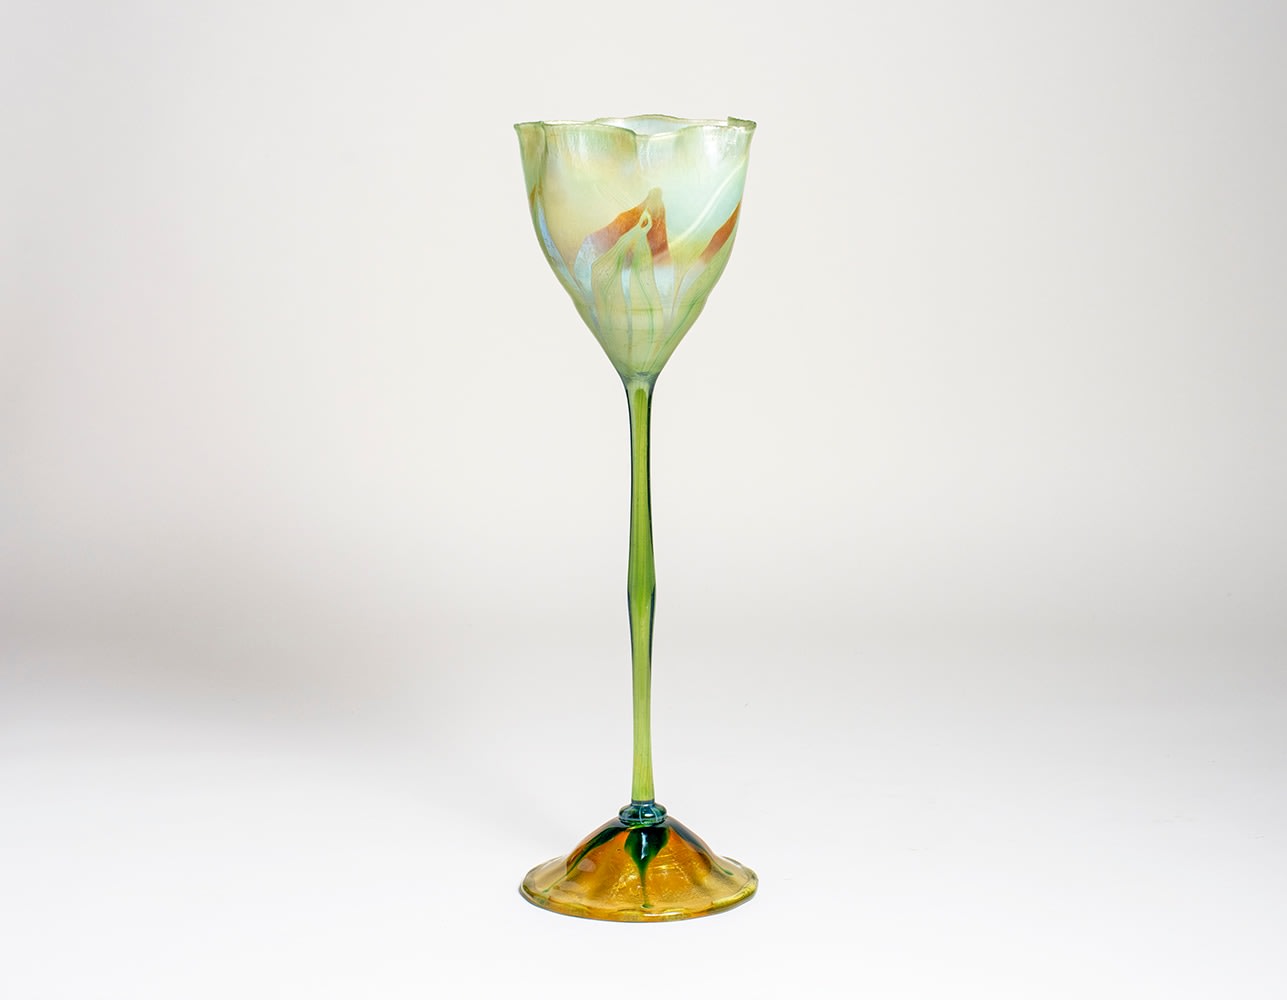 an early blown tiffany glass &quot;flower form&quot; vase, an art glass piece meant to be a piece of sclupture instead of a vase, the thin stem rising to a ruffled flower cup decorated with iridescent pulled leaf decoration, the base glass a pale opalescent green